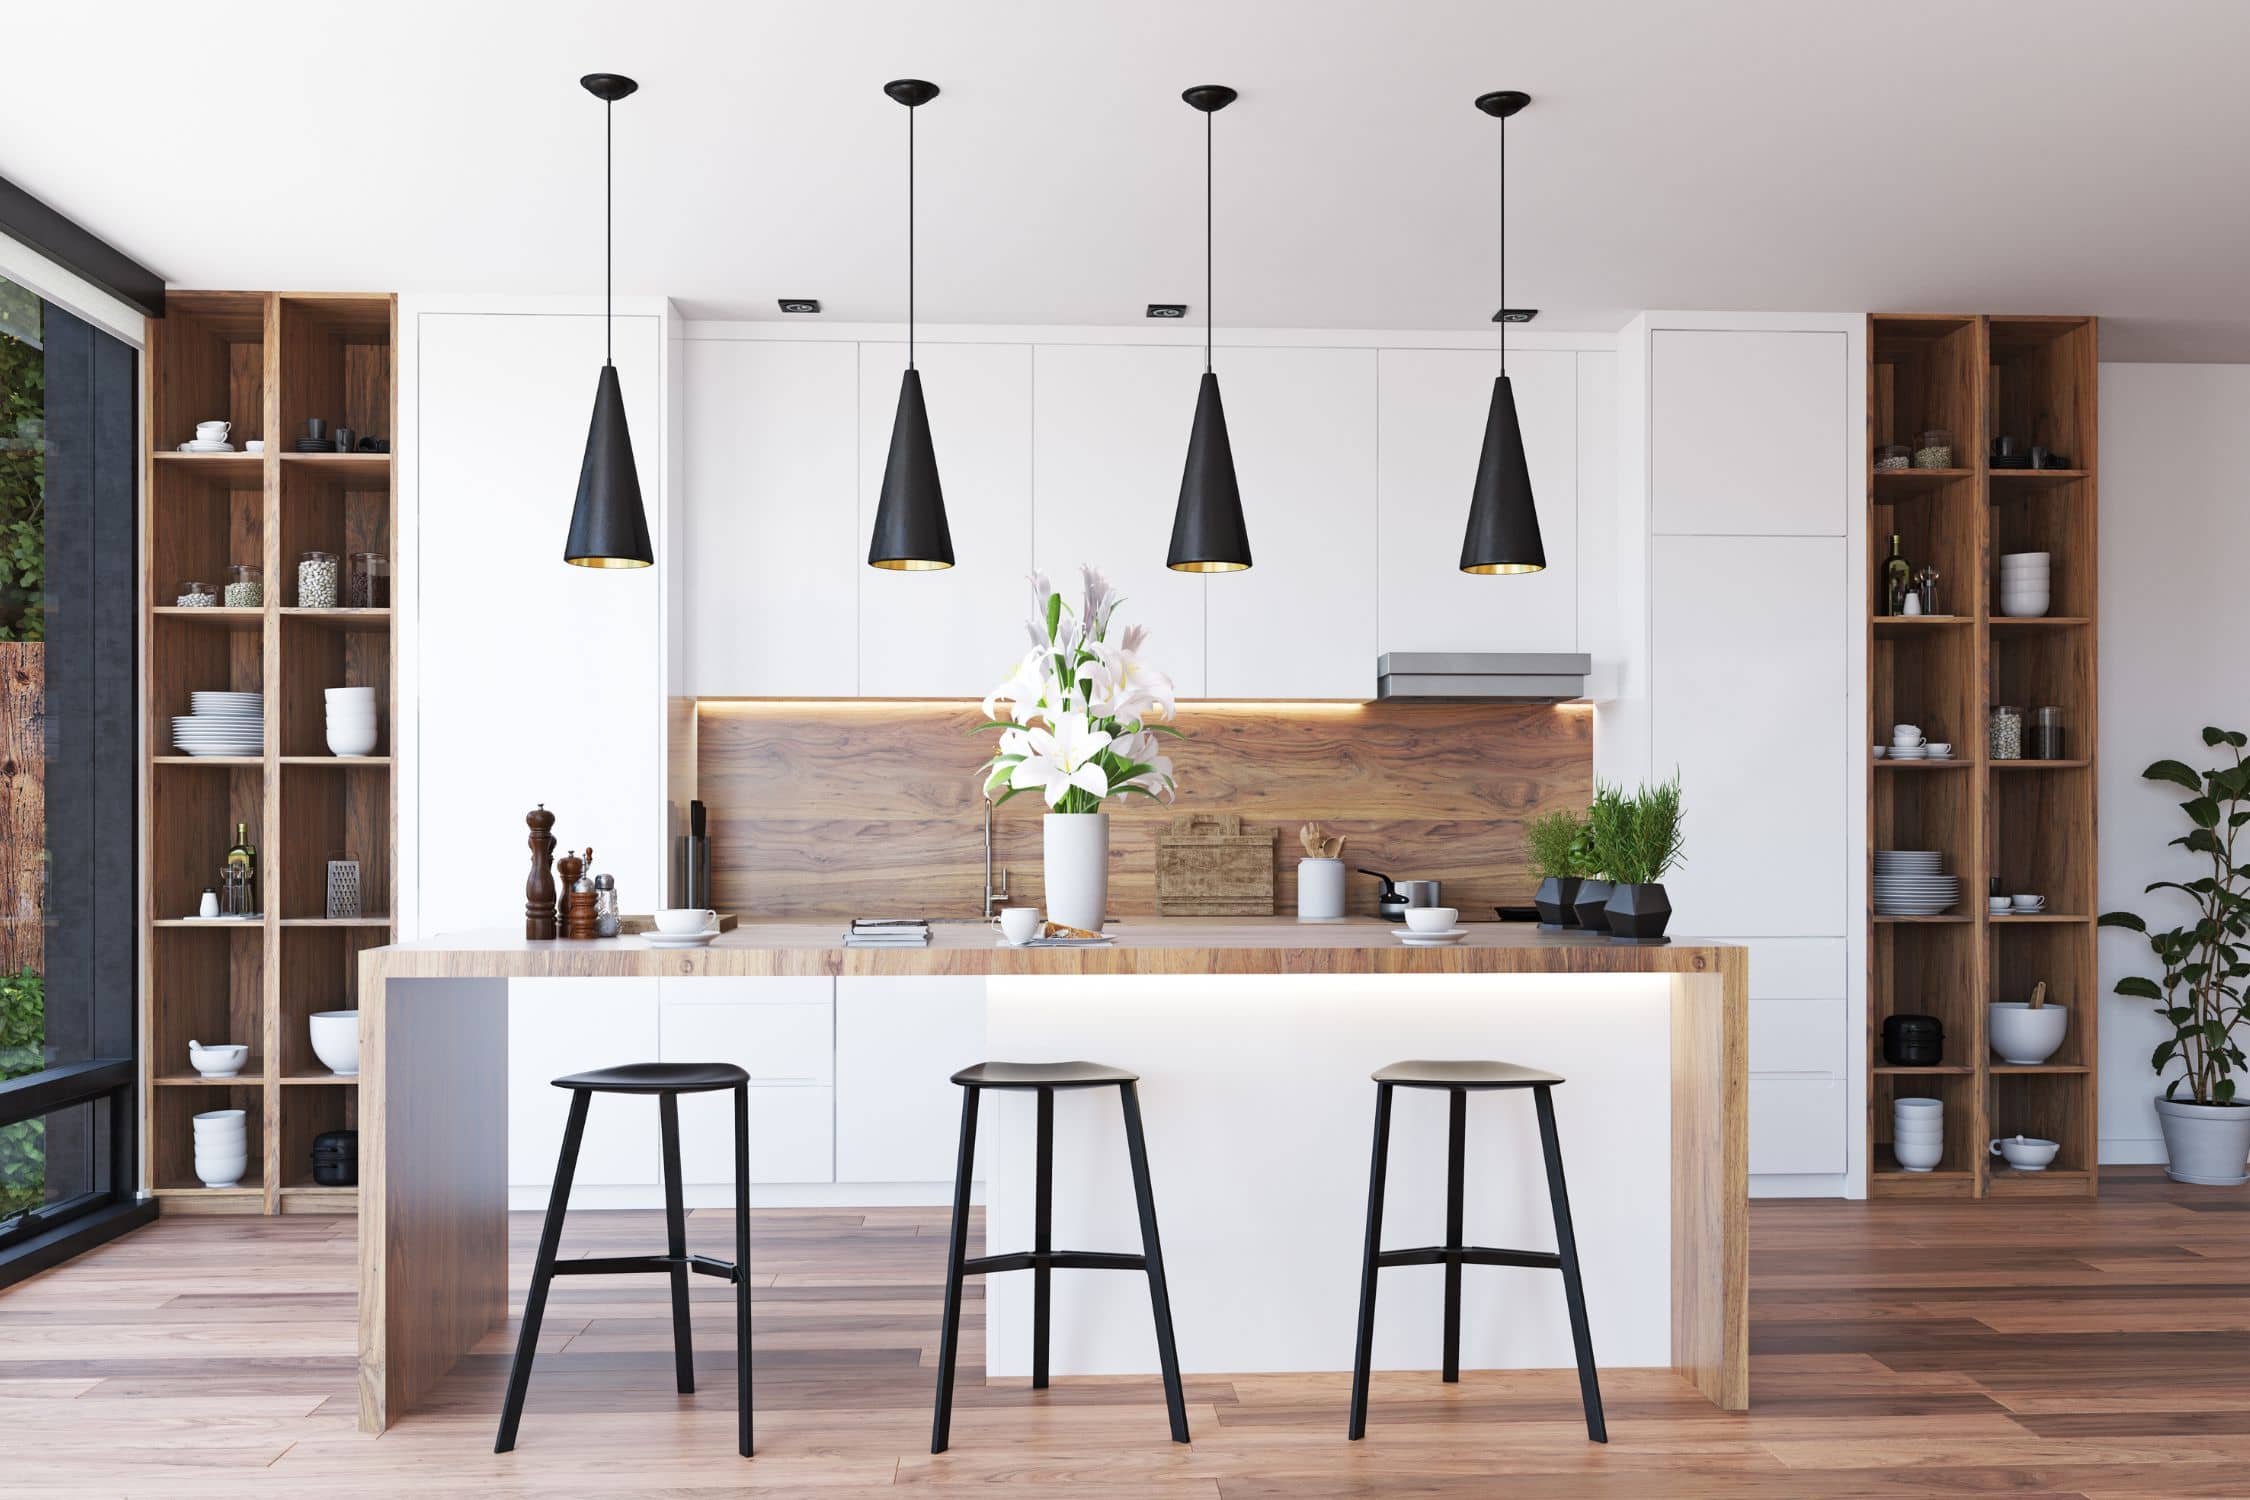 Design tips for modernising your home to captivate buyers